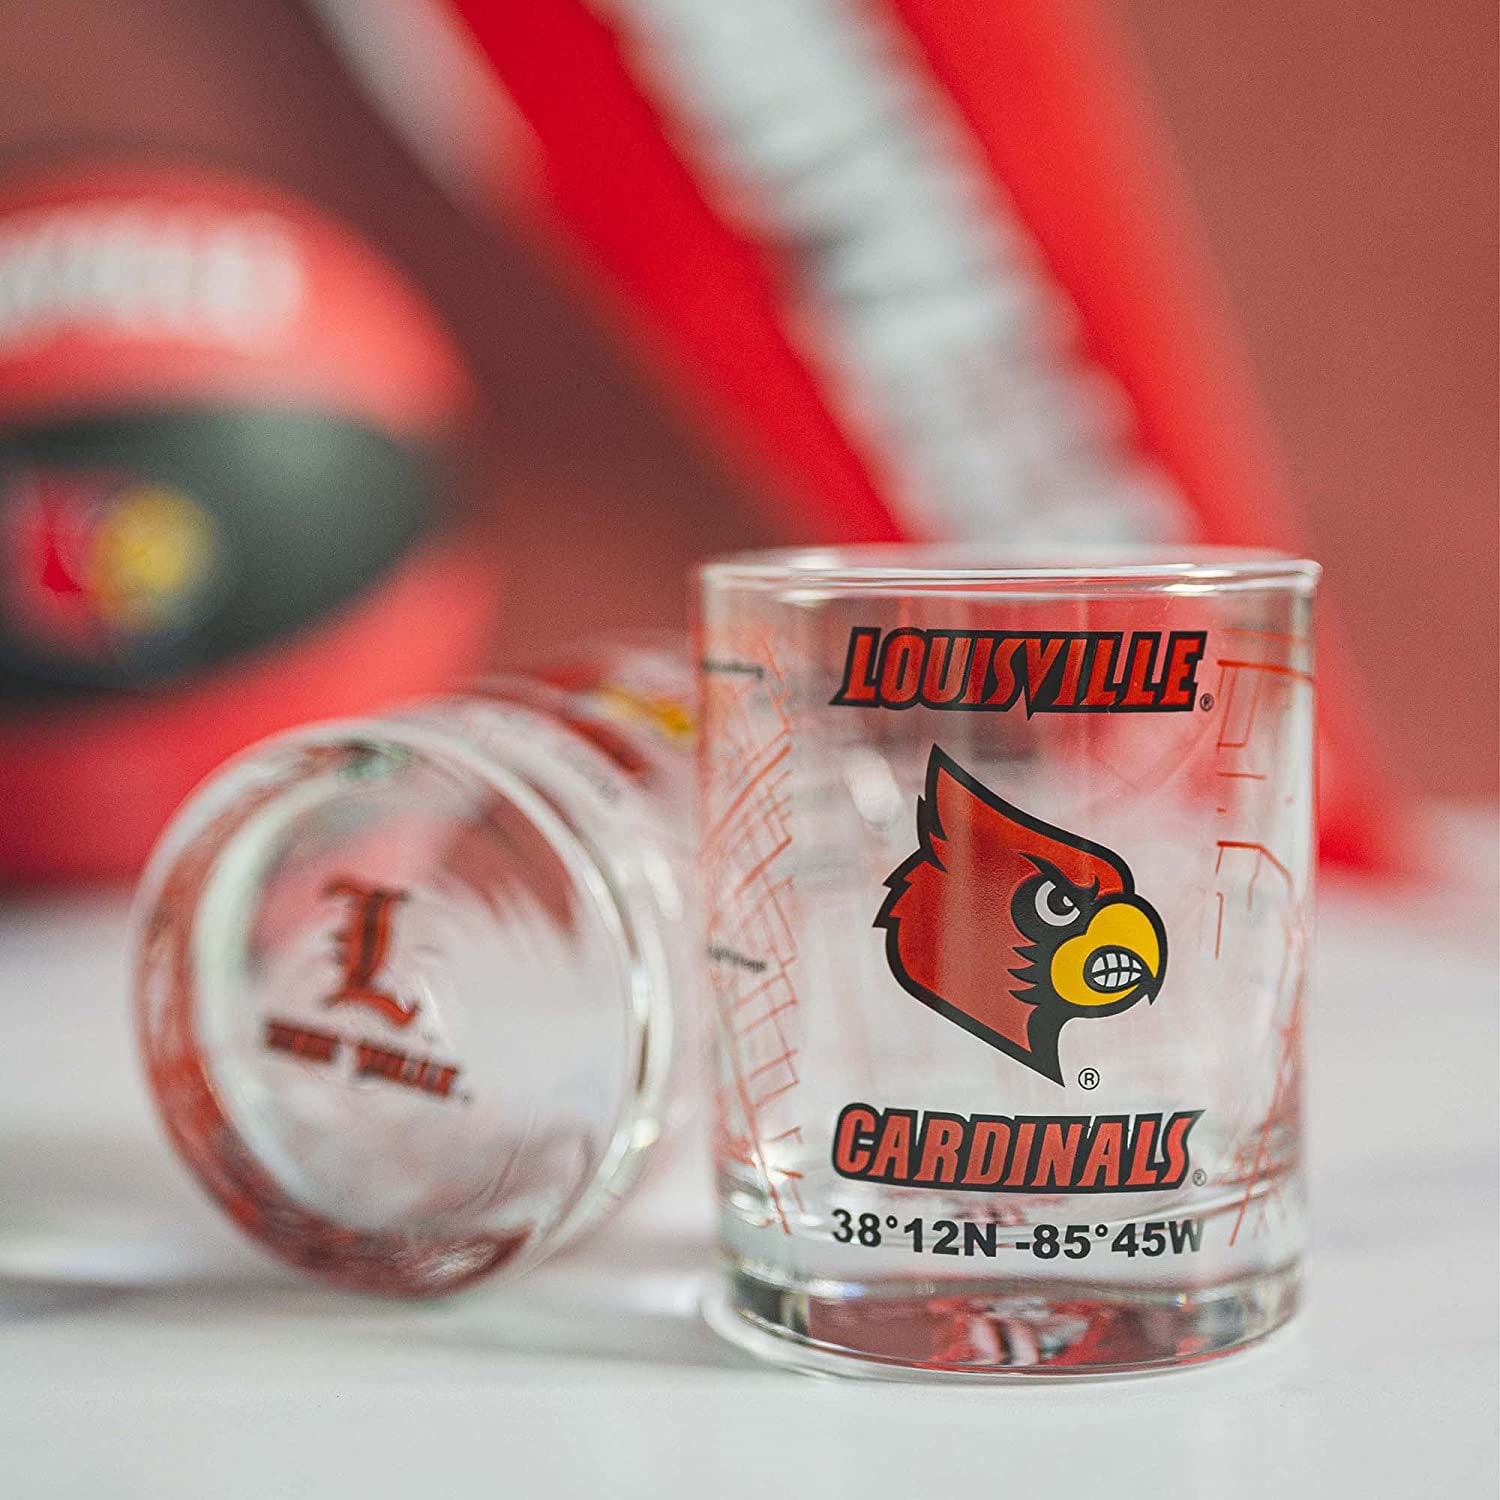 University Of Louisville Whiskey Glass Set (2 Low Ball Glasses)  - Contains Full Color Louisville Cardinals Logo & Campus Map - Cardinals  Gift Idea for College Grads & Alumni 